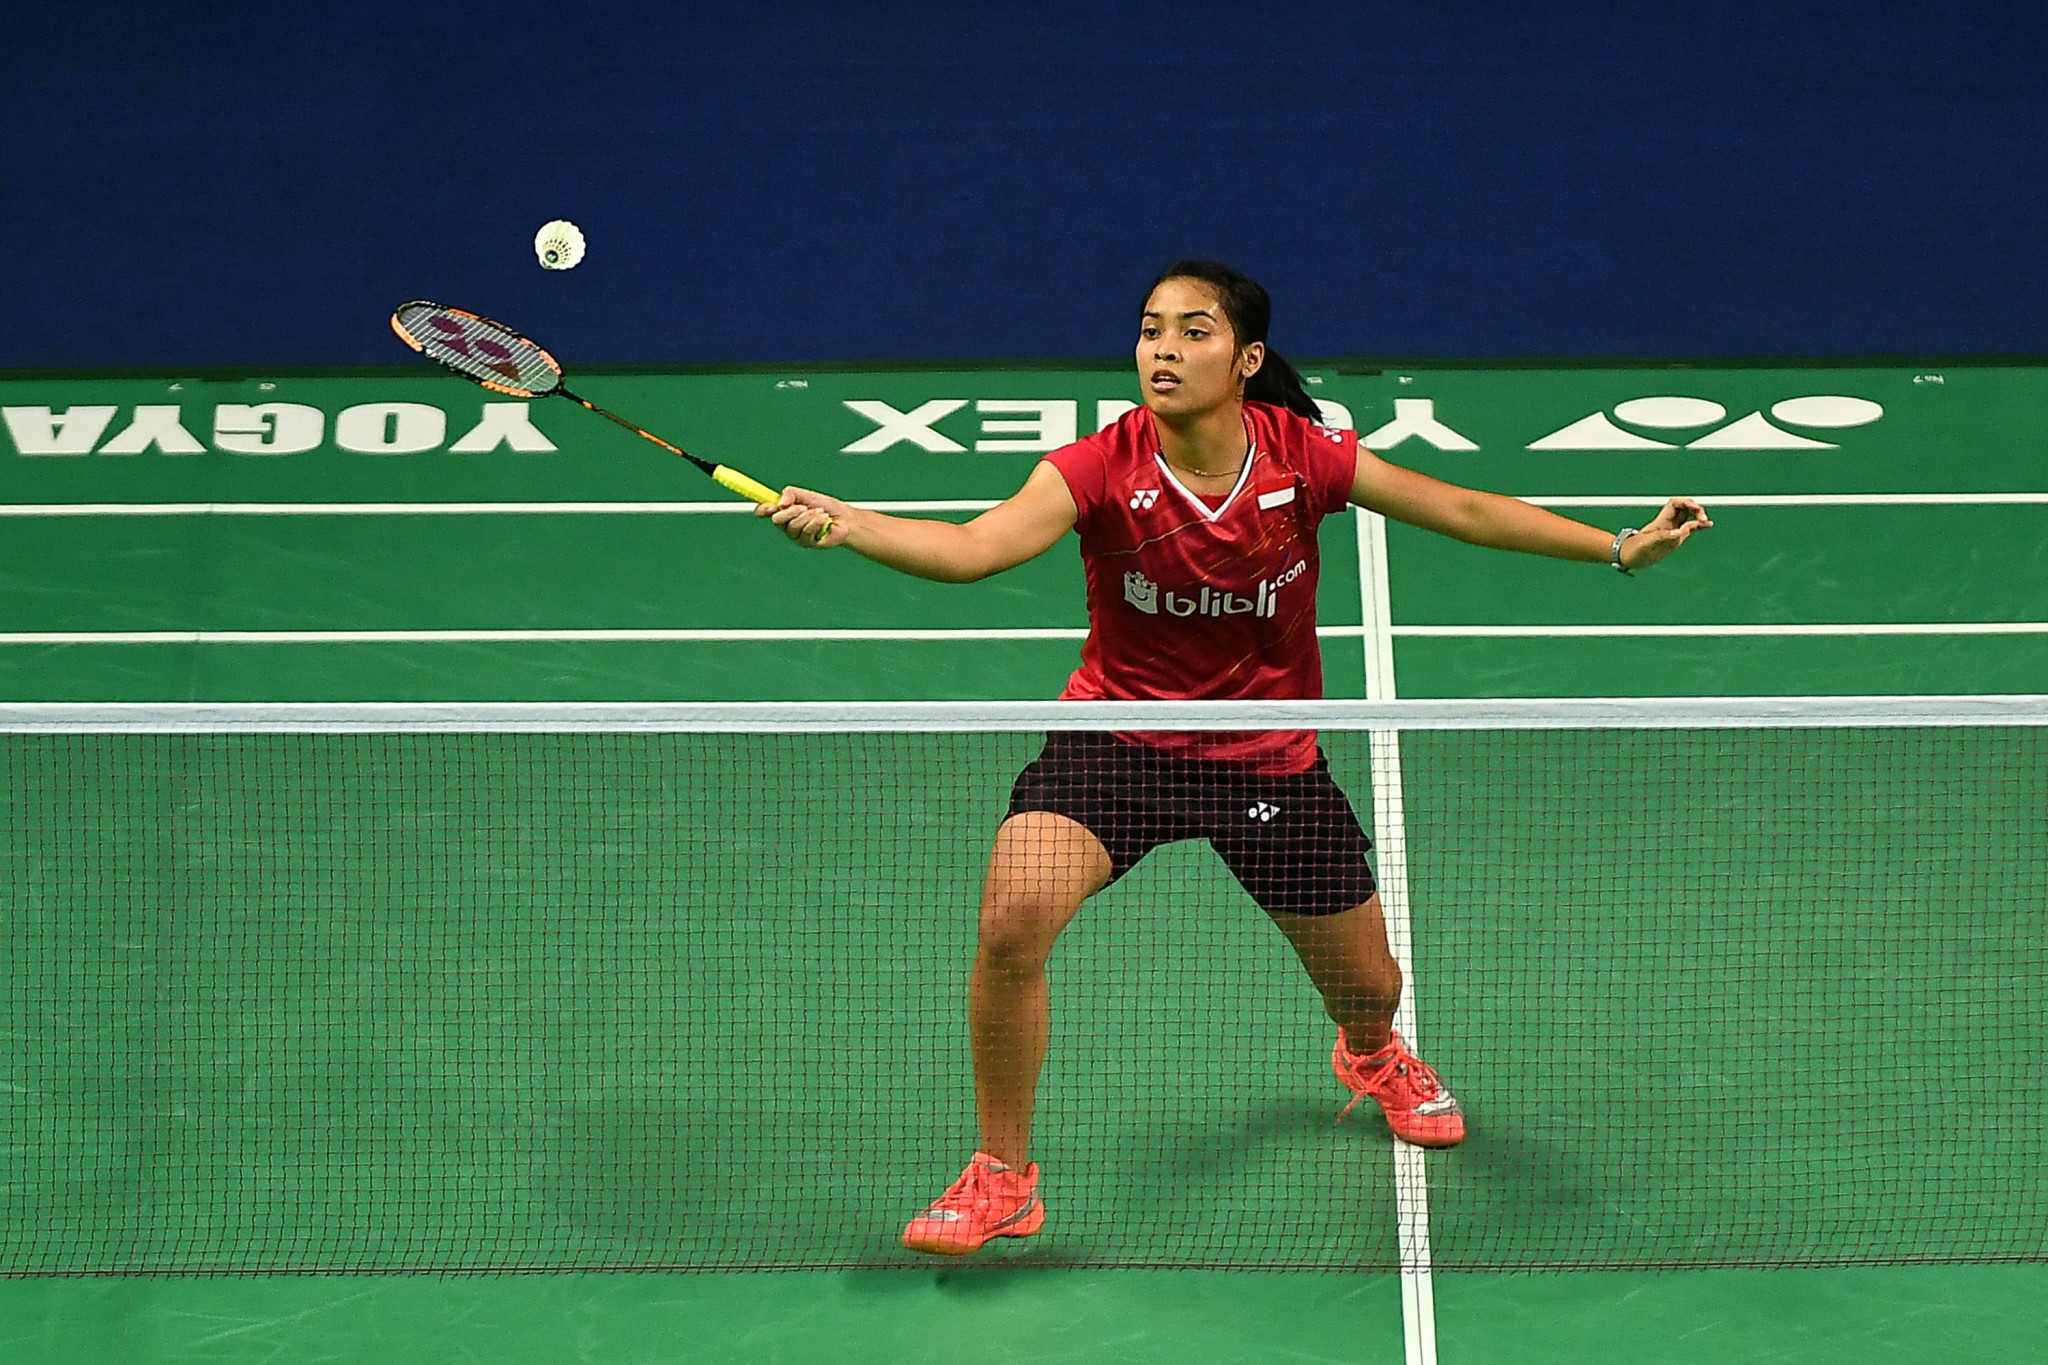 Home favourite through to women's singles final at Badminton World Junior Championships